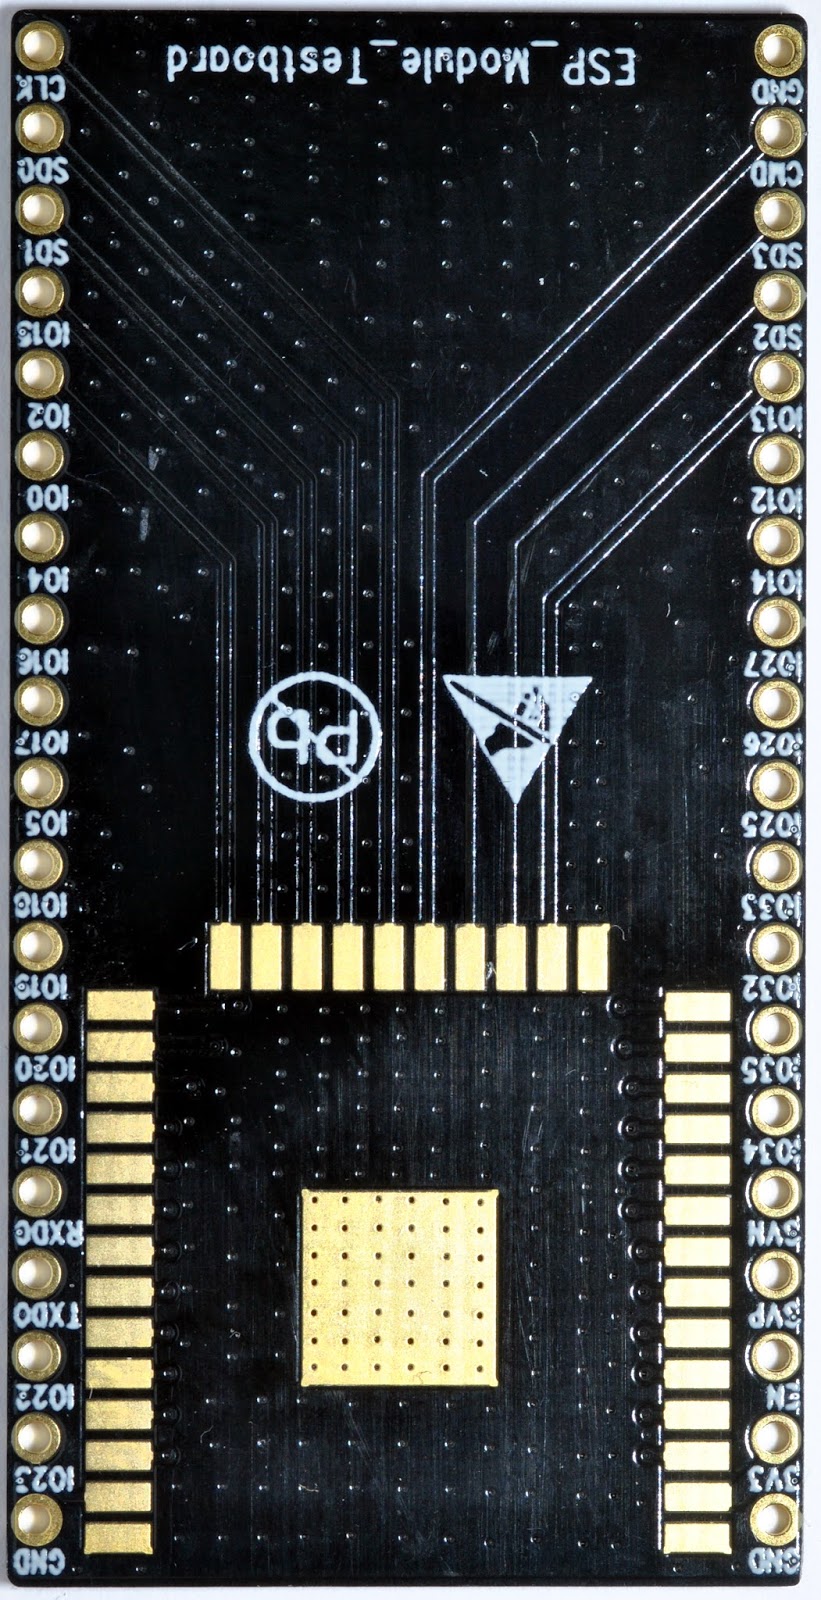 ESP32 ESP WROOM Chip microprocessors up to 600 DMIPS